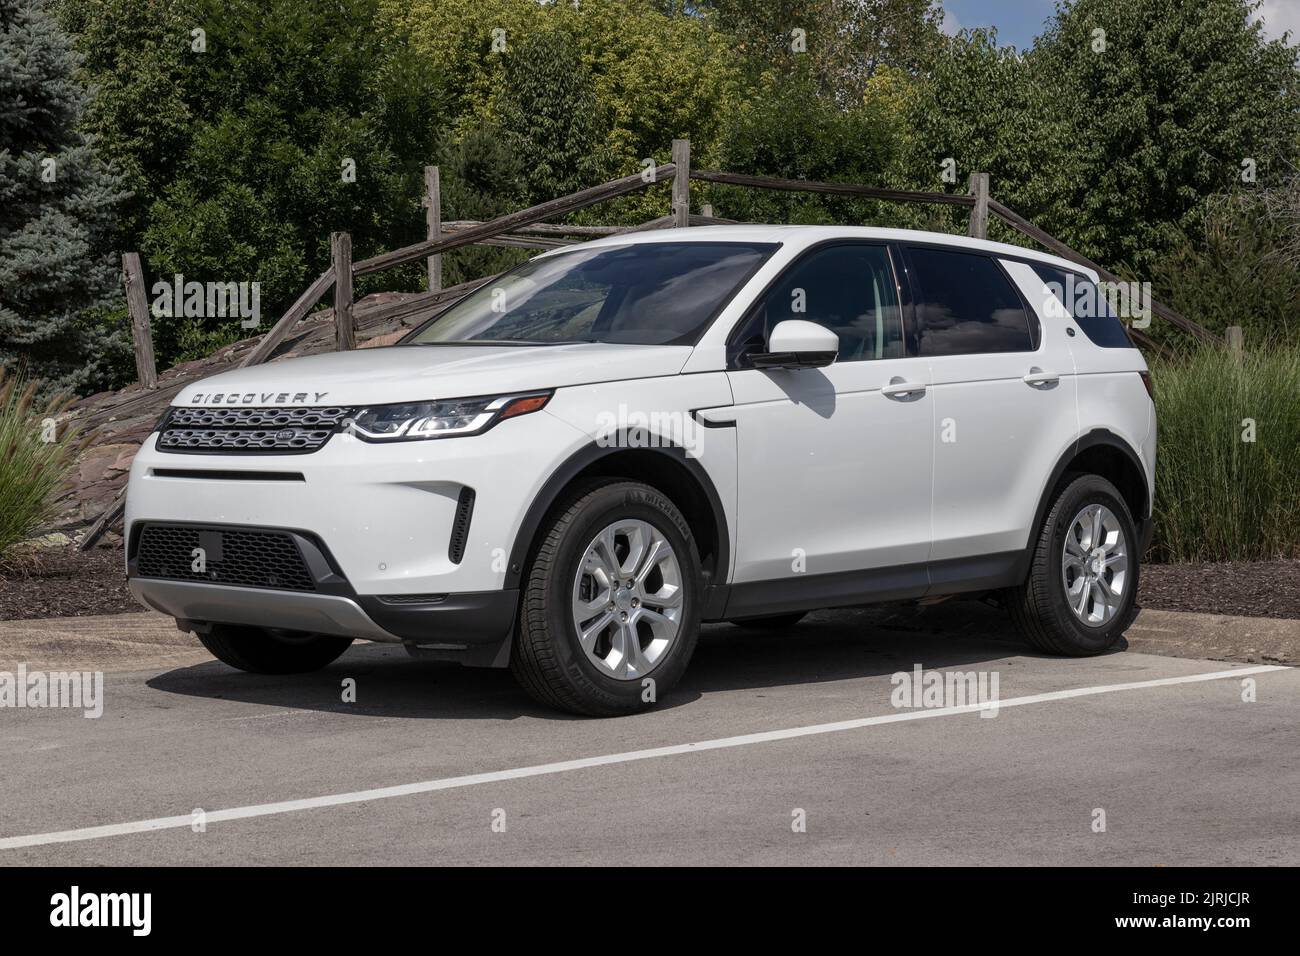 Indianapolis - Circa August 2022: Land Rover Discovery display at a dealership. Land Rover offers the Discovery in P300 and P360 models. Stock Photo